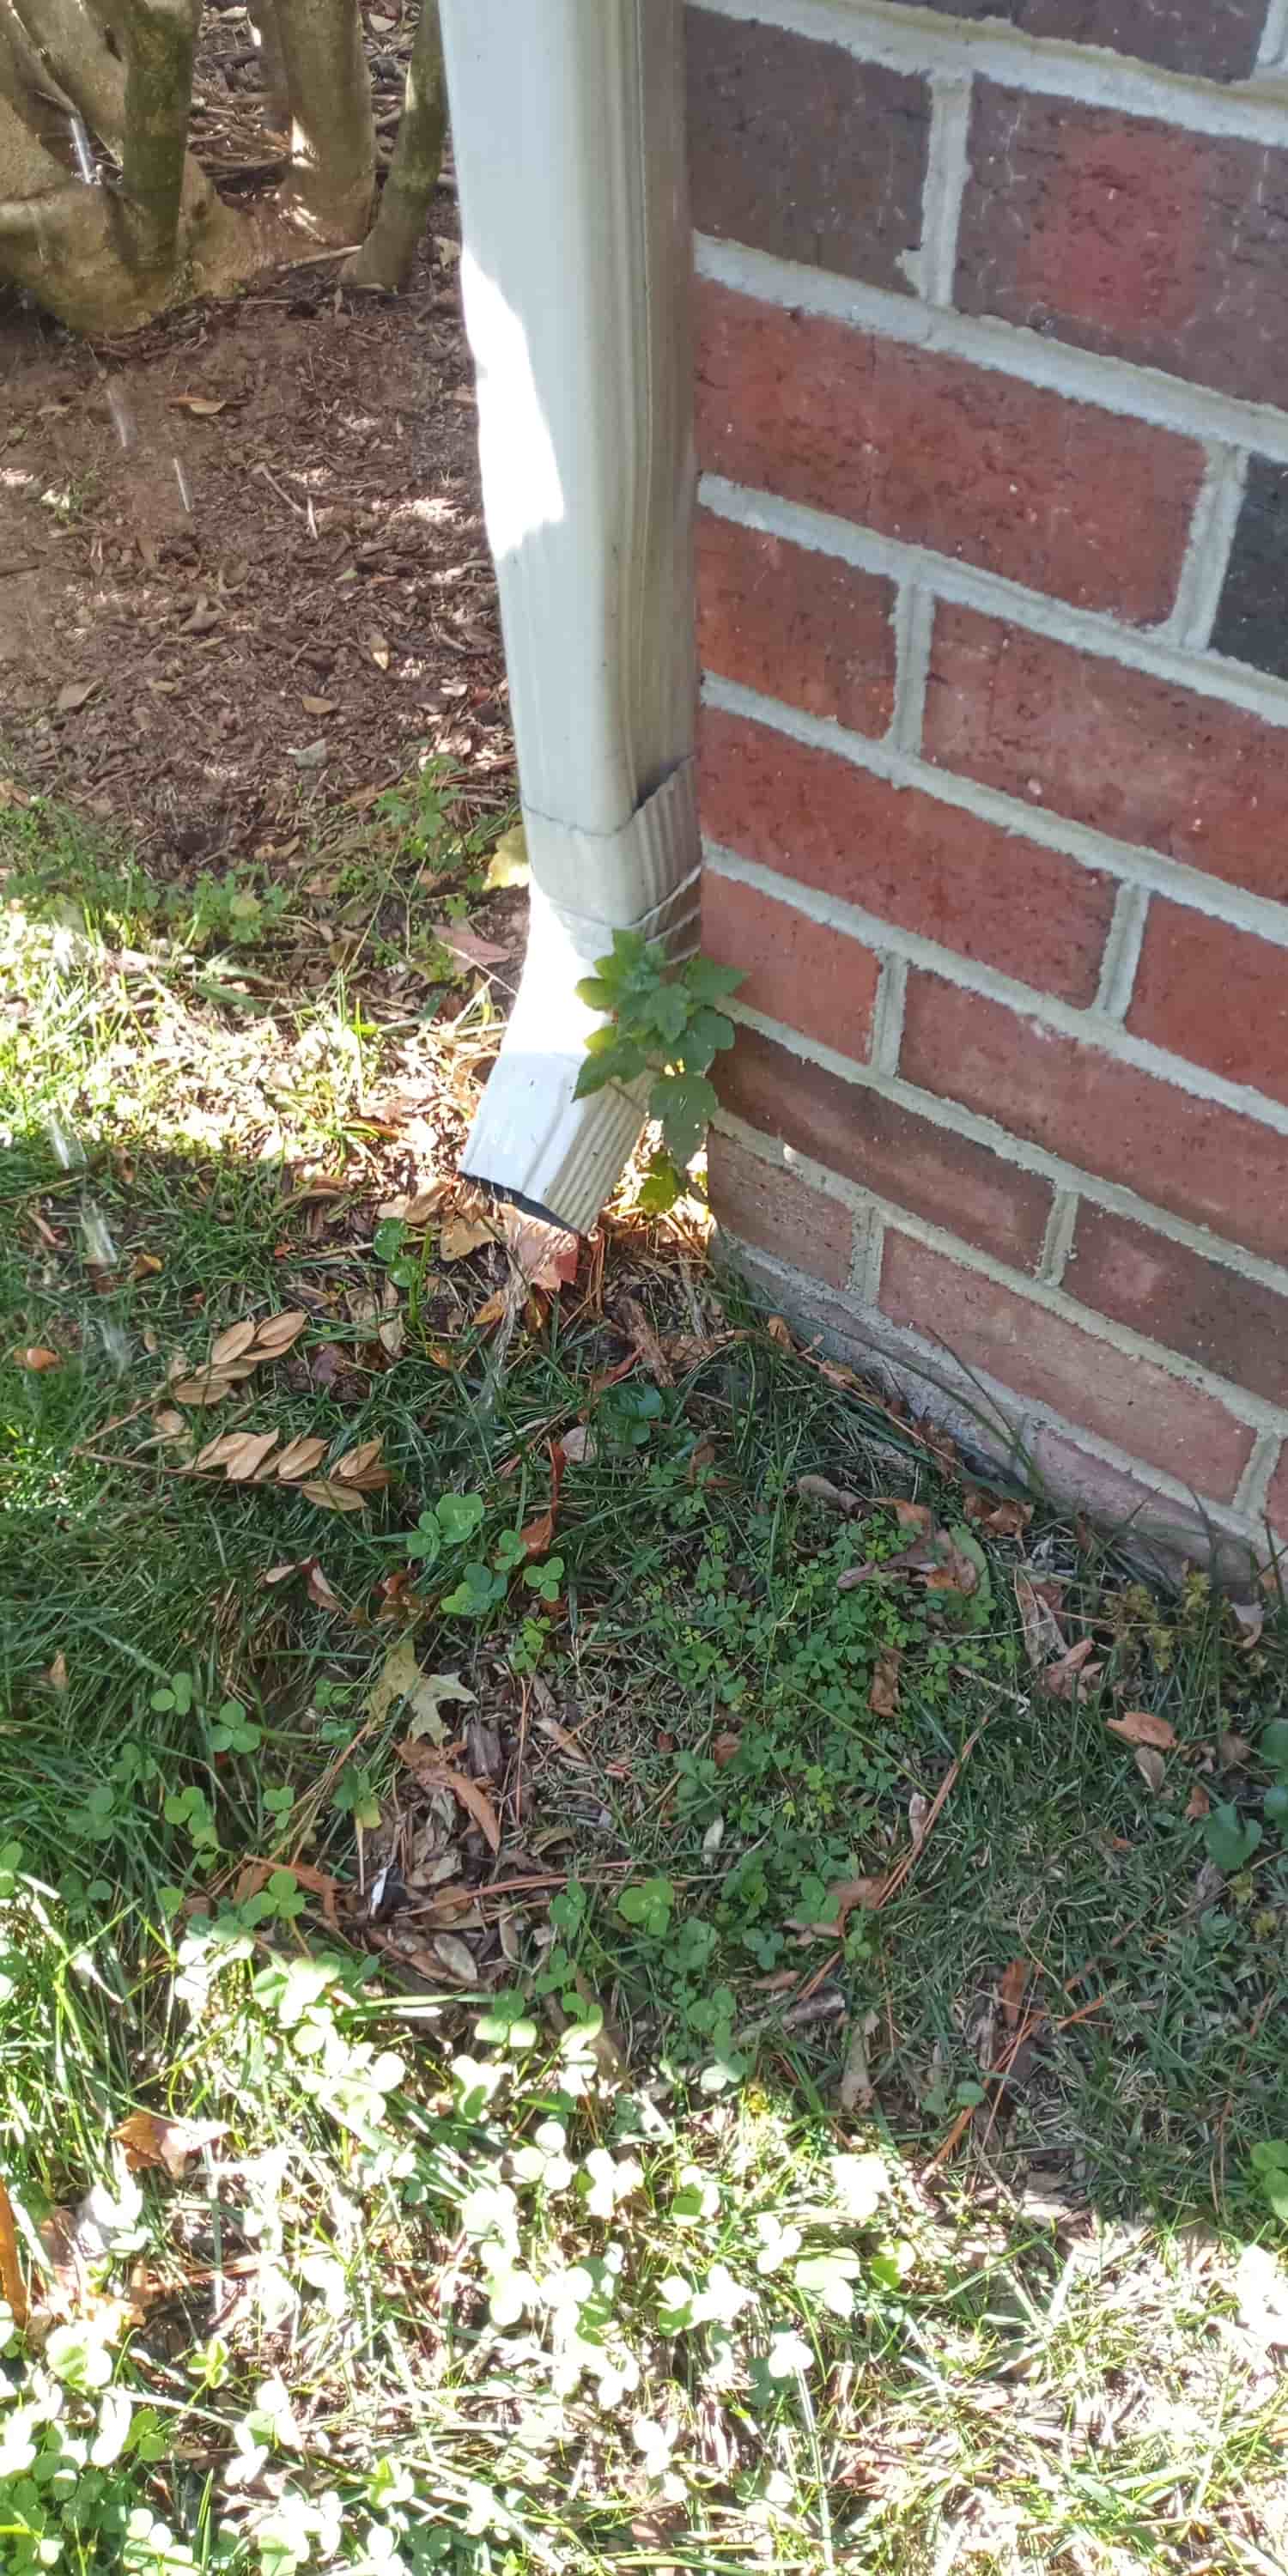 clean gutter downspout from ground